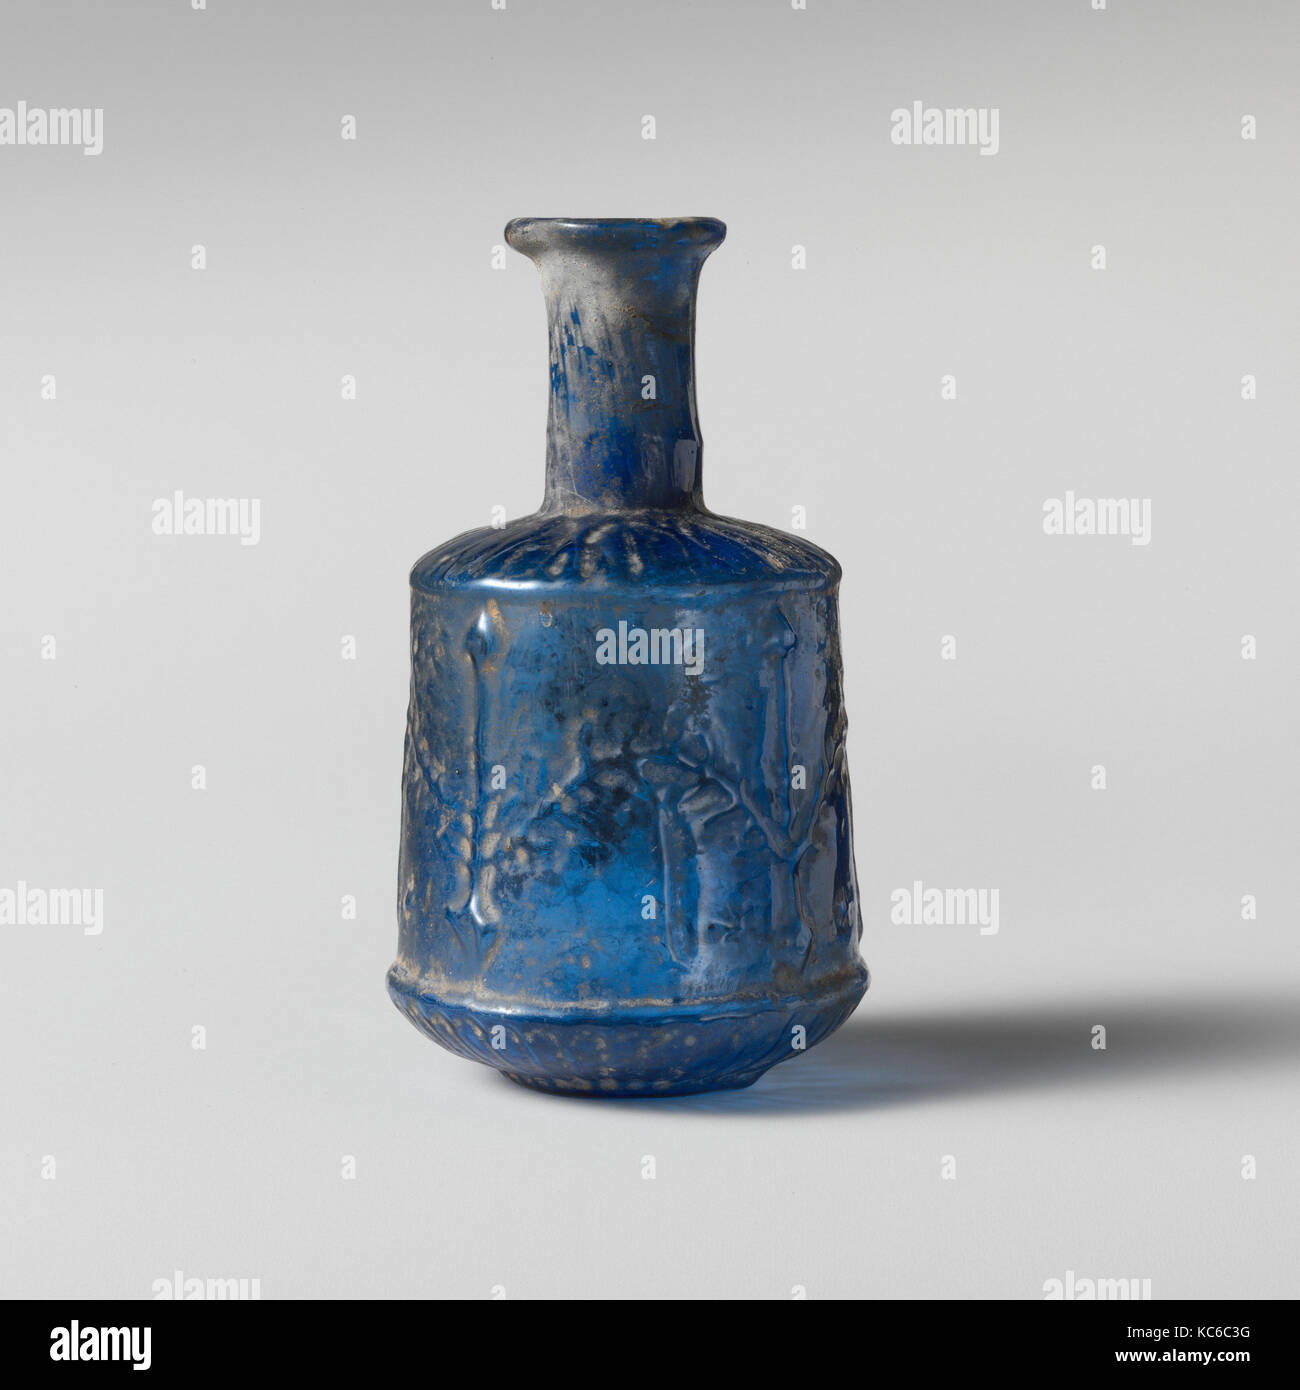 Glass bottle, Early Imperial, 1st century A.D., Roman, Glass; blown in a three-part mold, H.: 3 1/4 in. (8.3 cm), Glass Stock Photo